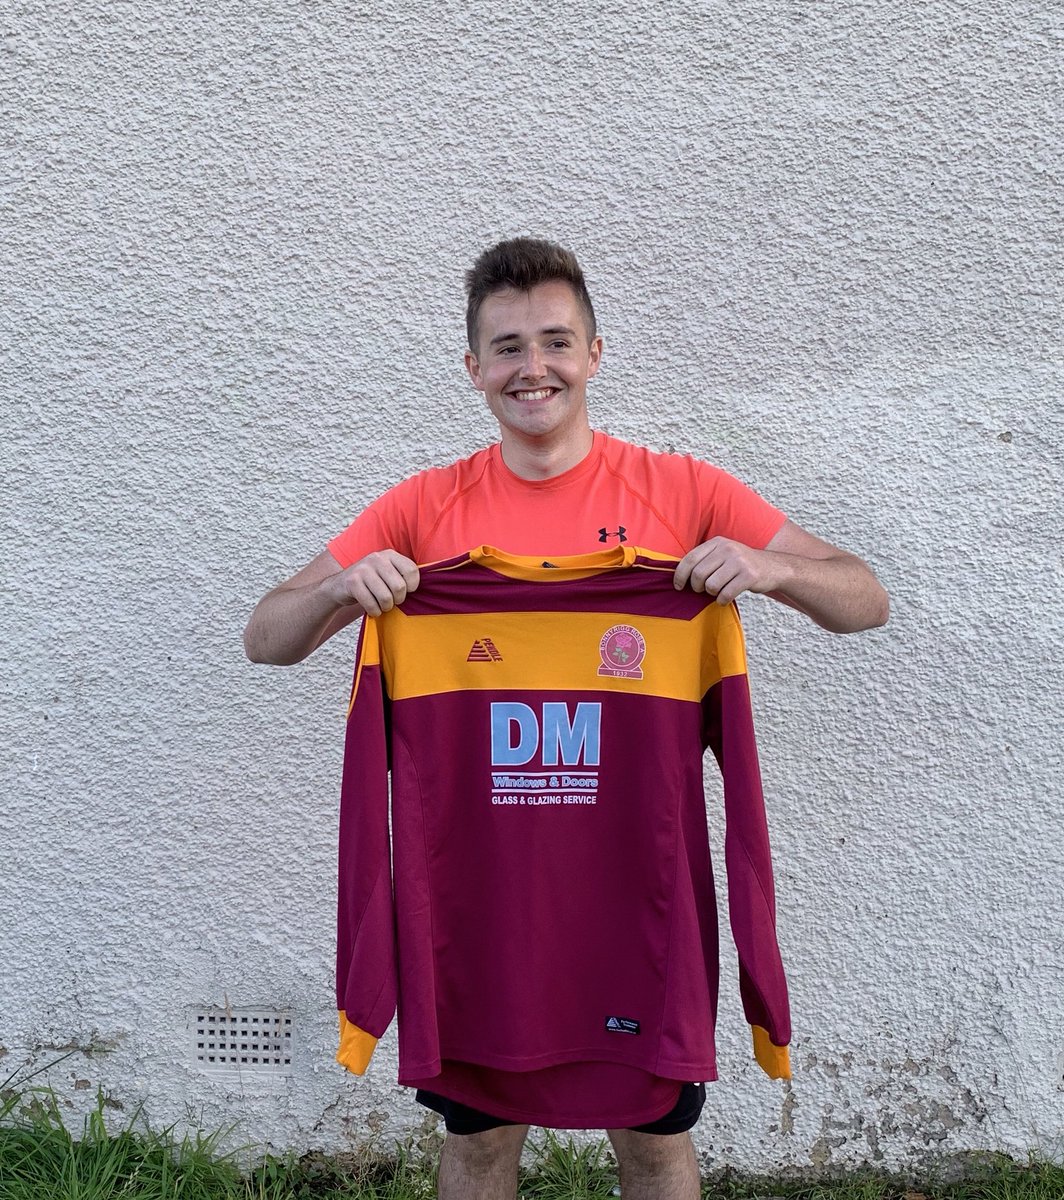 Next up we have our top goalscorer from last season, Ross Pratt. By possessing the ability to make the killer pass in the final third on top of his keen eye for goal, Ross is able to operate in various roles in the forward areas and will be a key asset to the club this season.